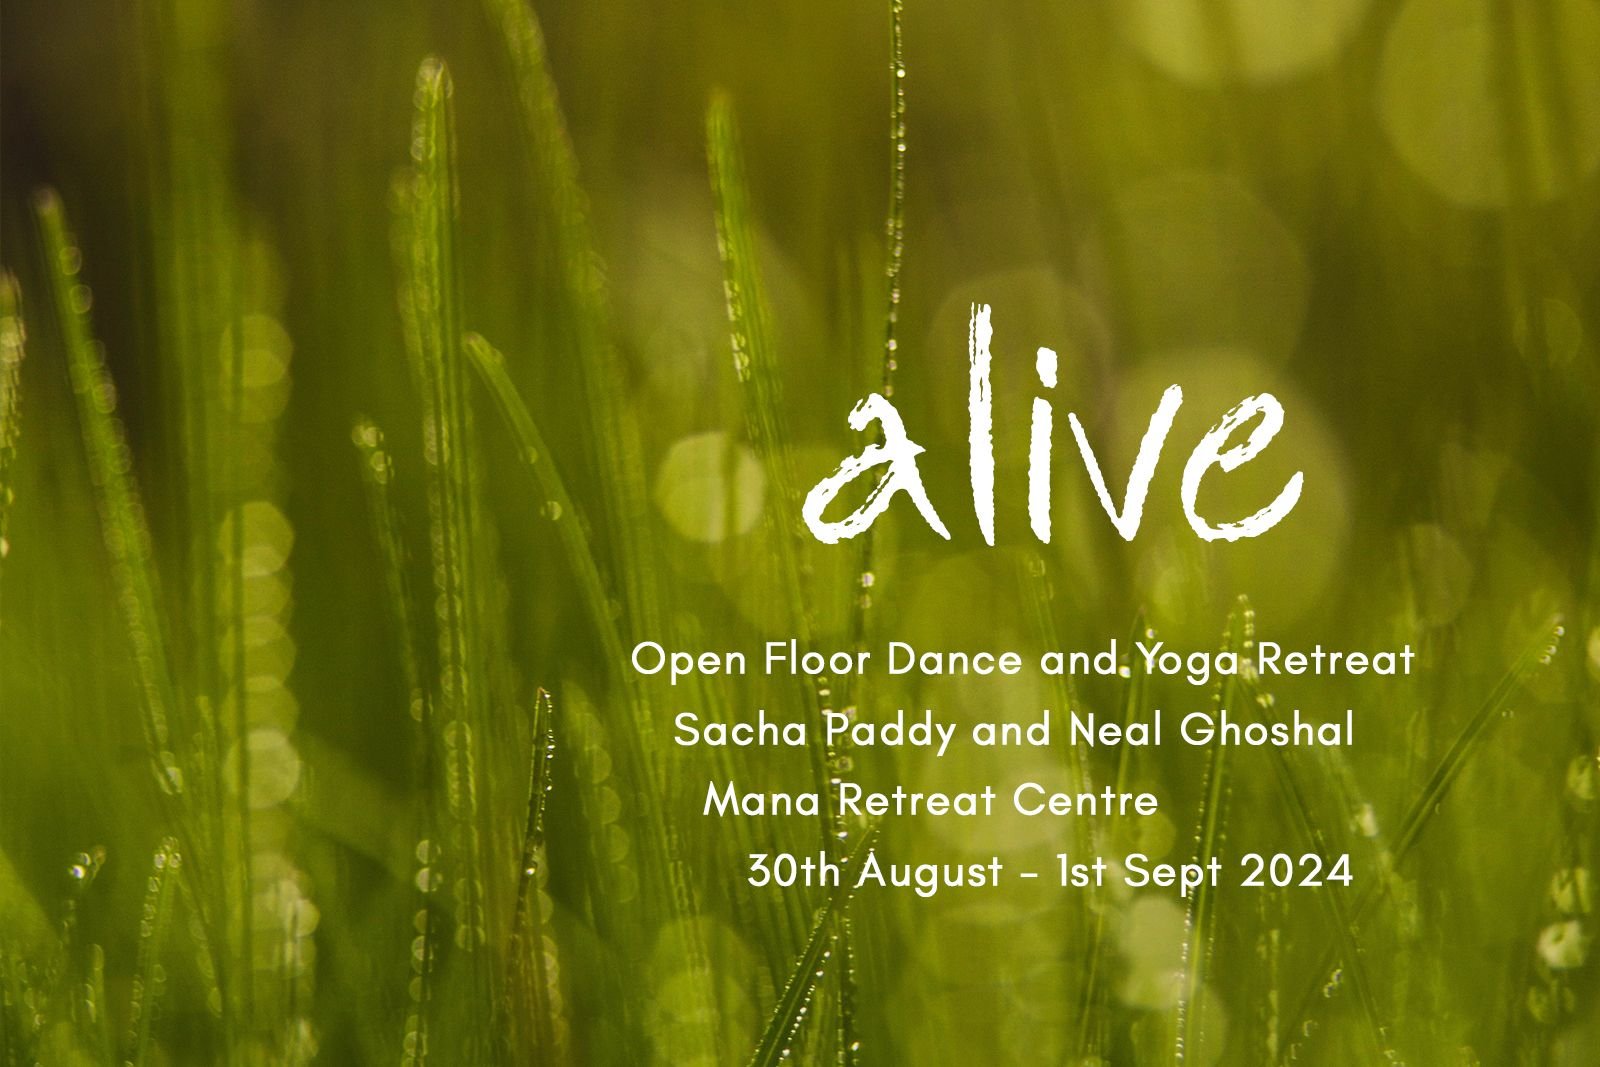 Alive - open floor dance snd Yoga retreat with Sacha Paddy and Neal Ghoshal